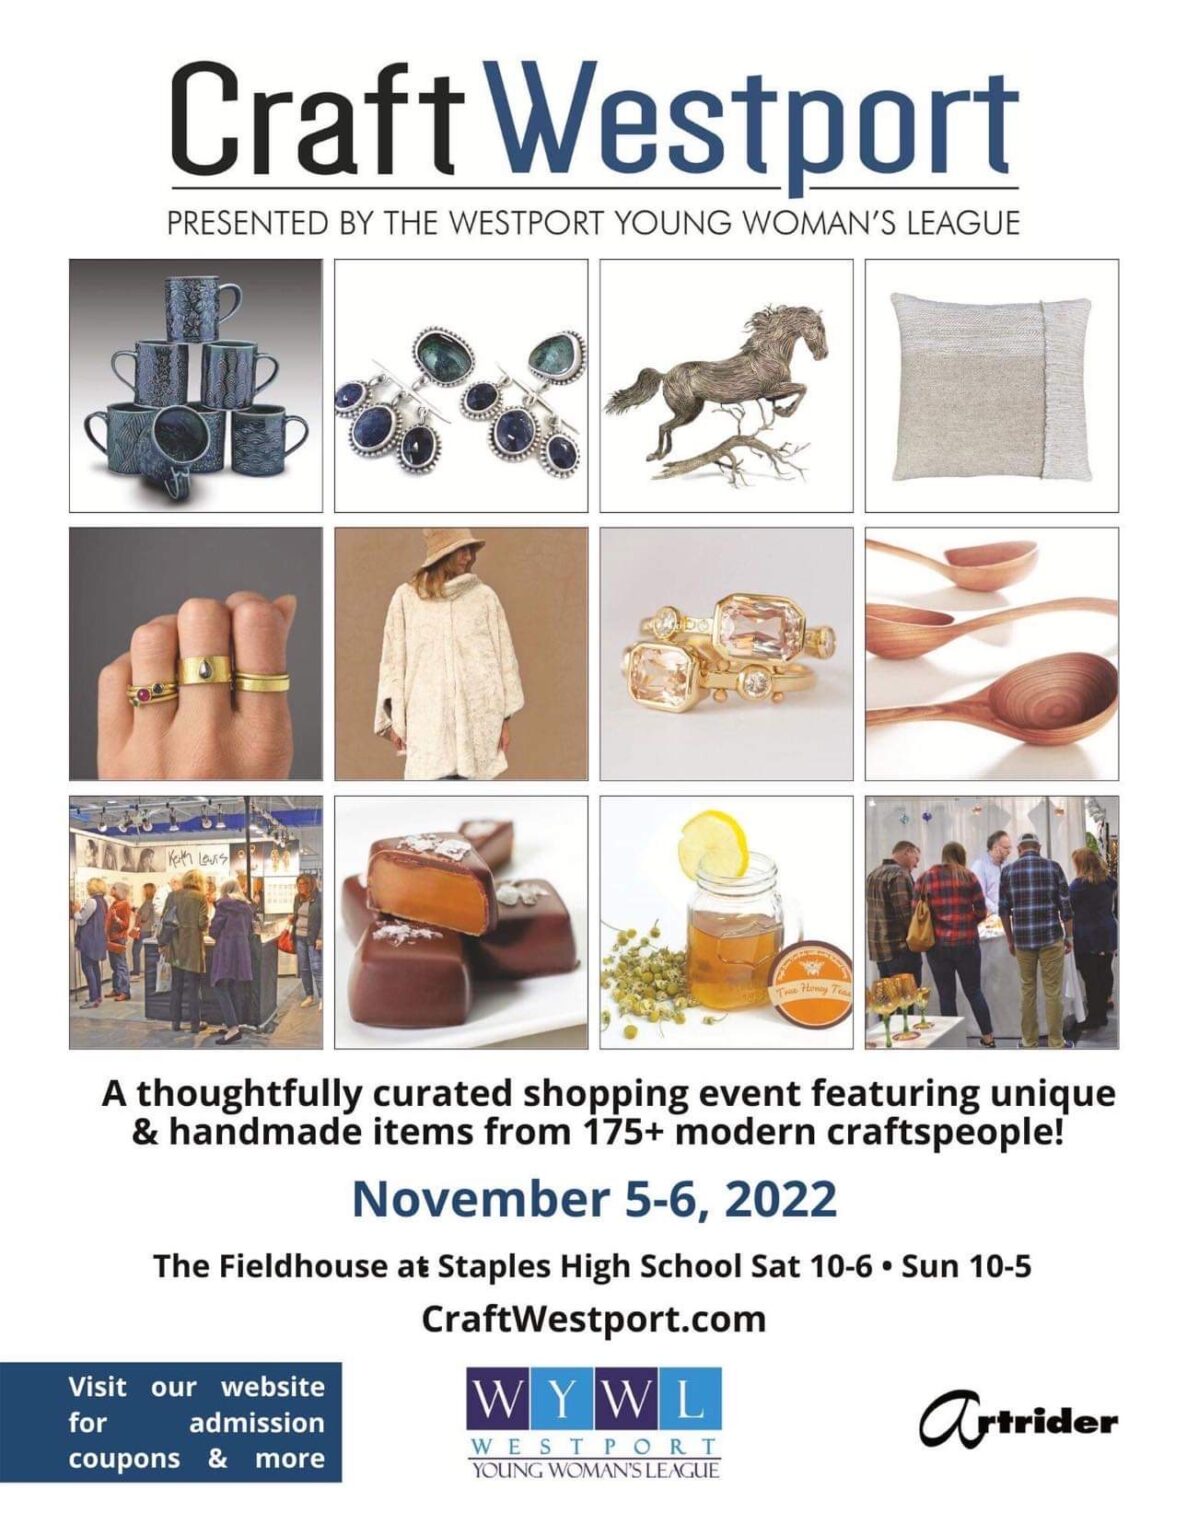 Craft Westport Presented by the Westport Young Woman’s League